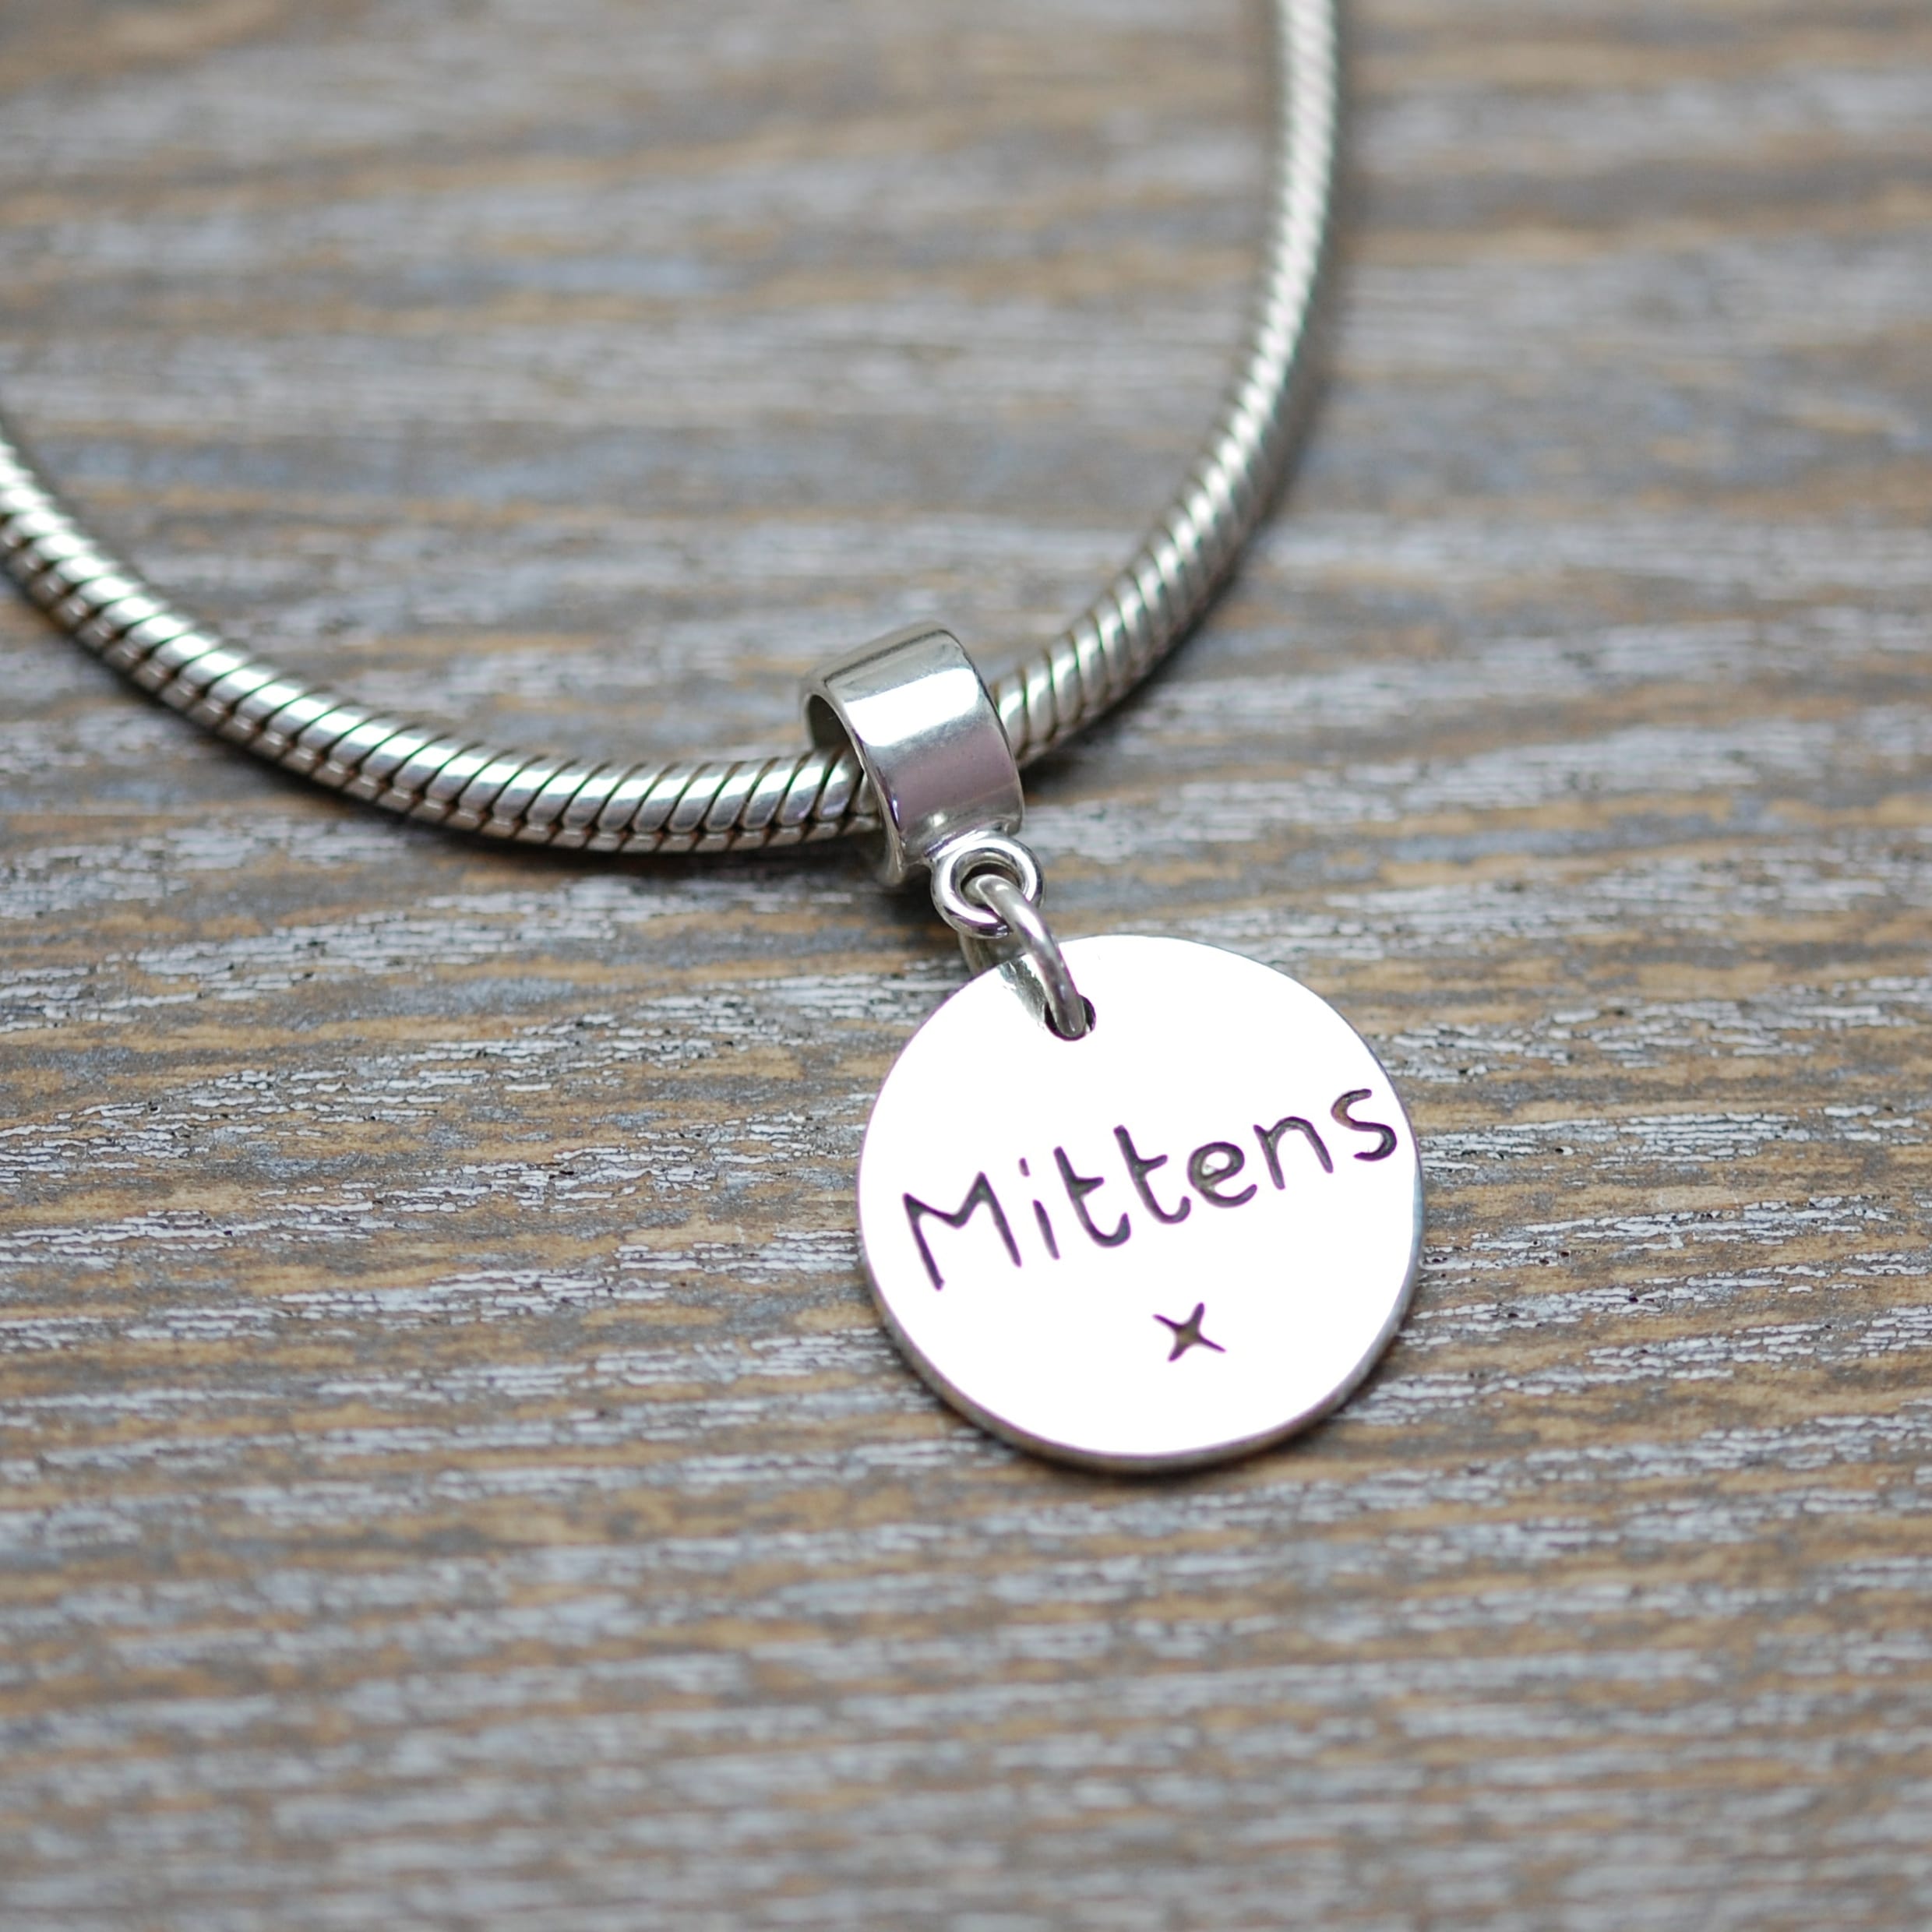 Inscription on the back of silver paw print charm